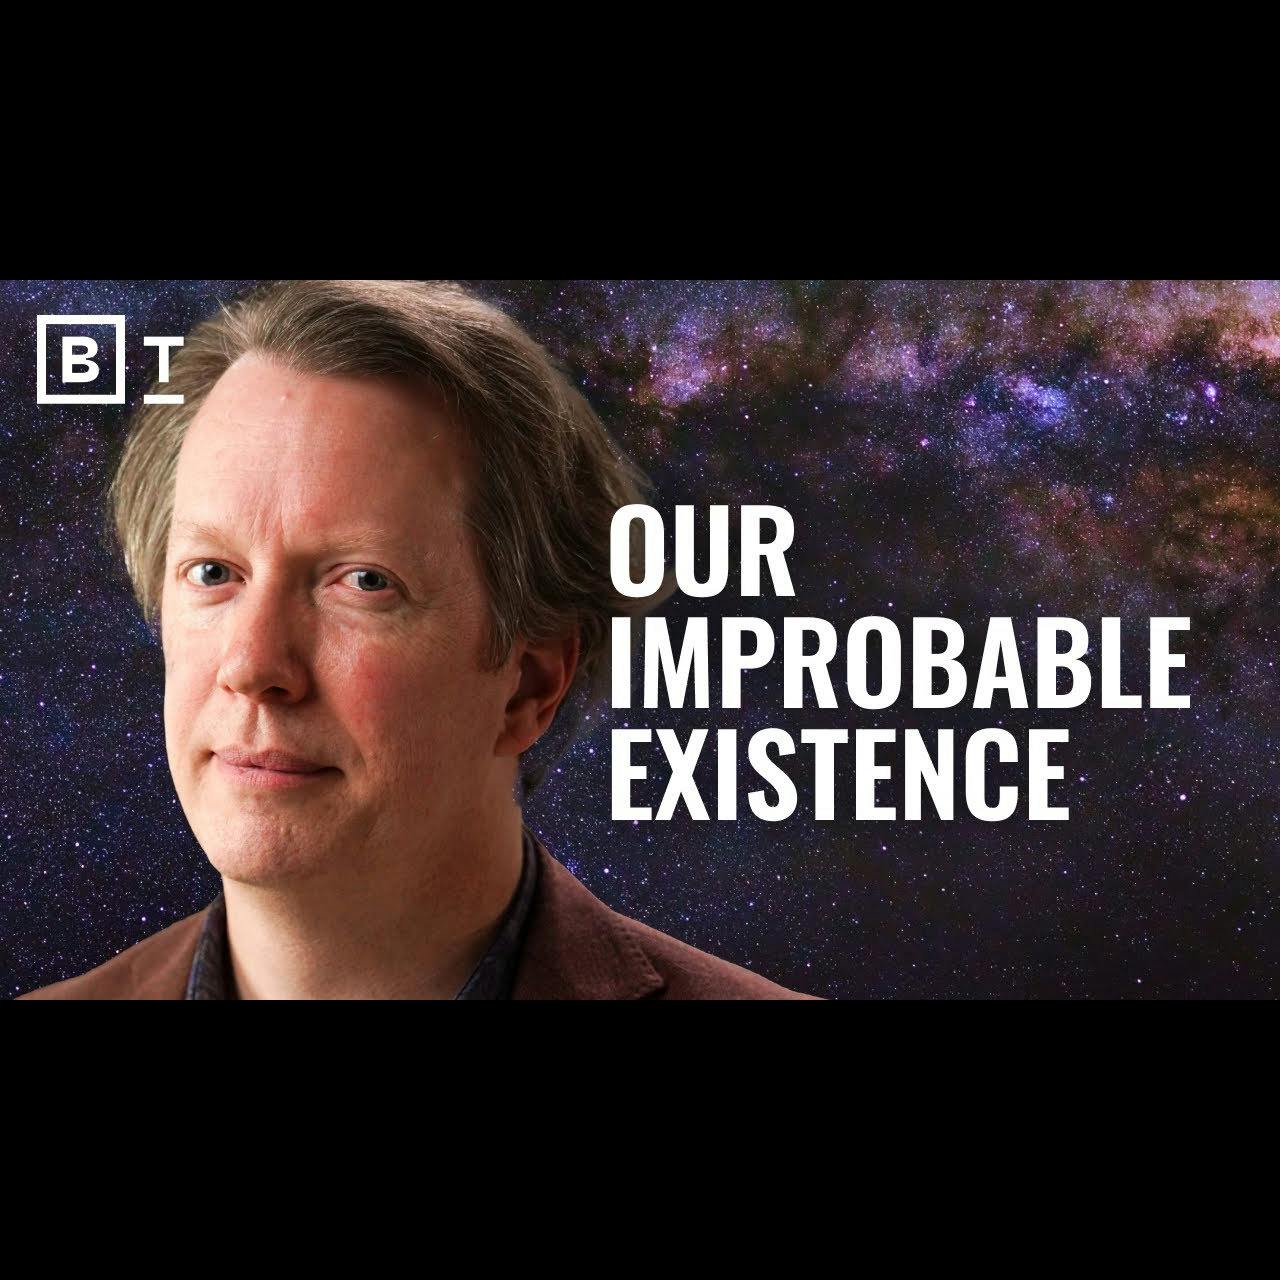 The beauty of our improbable existence with a NASA expert, physicist & futurist - BIGTHINK